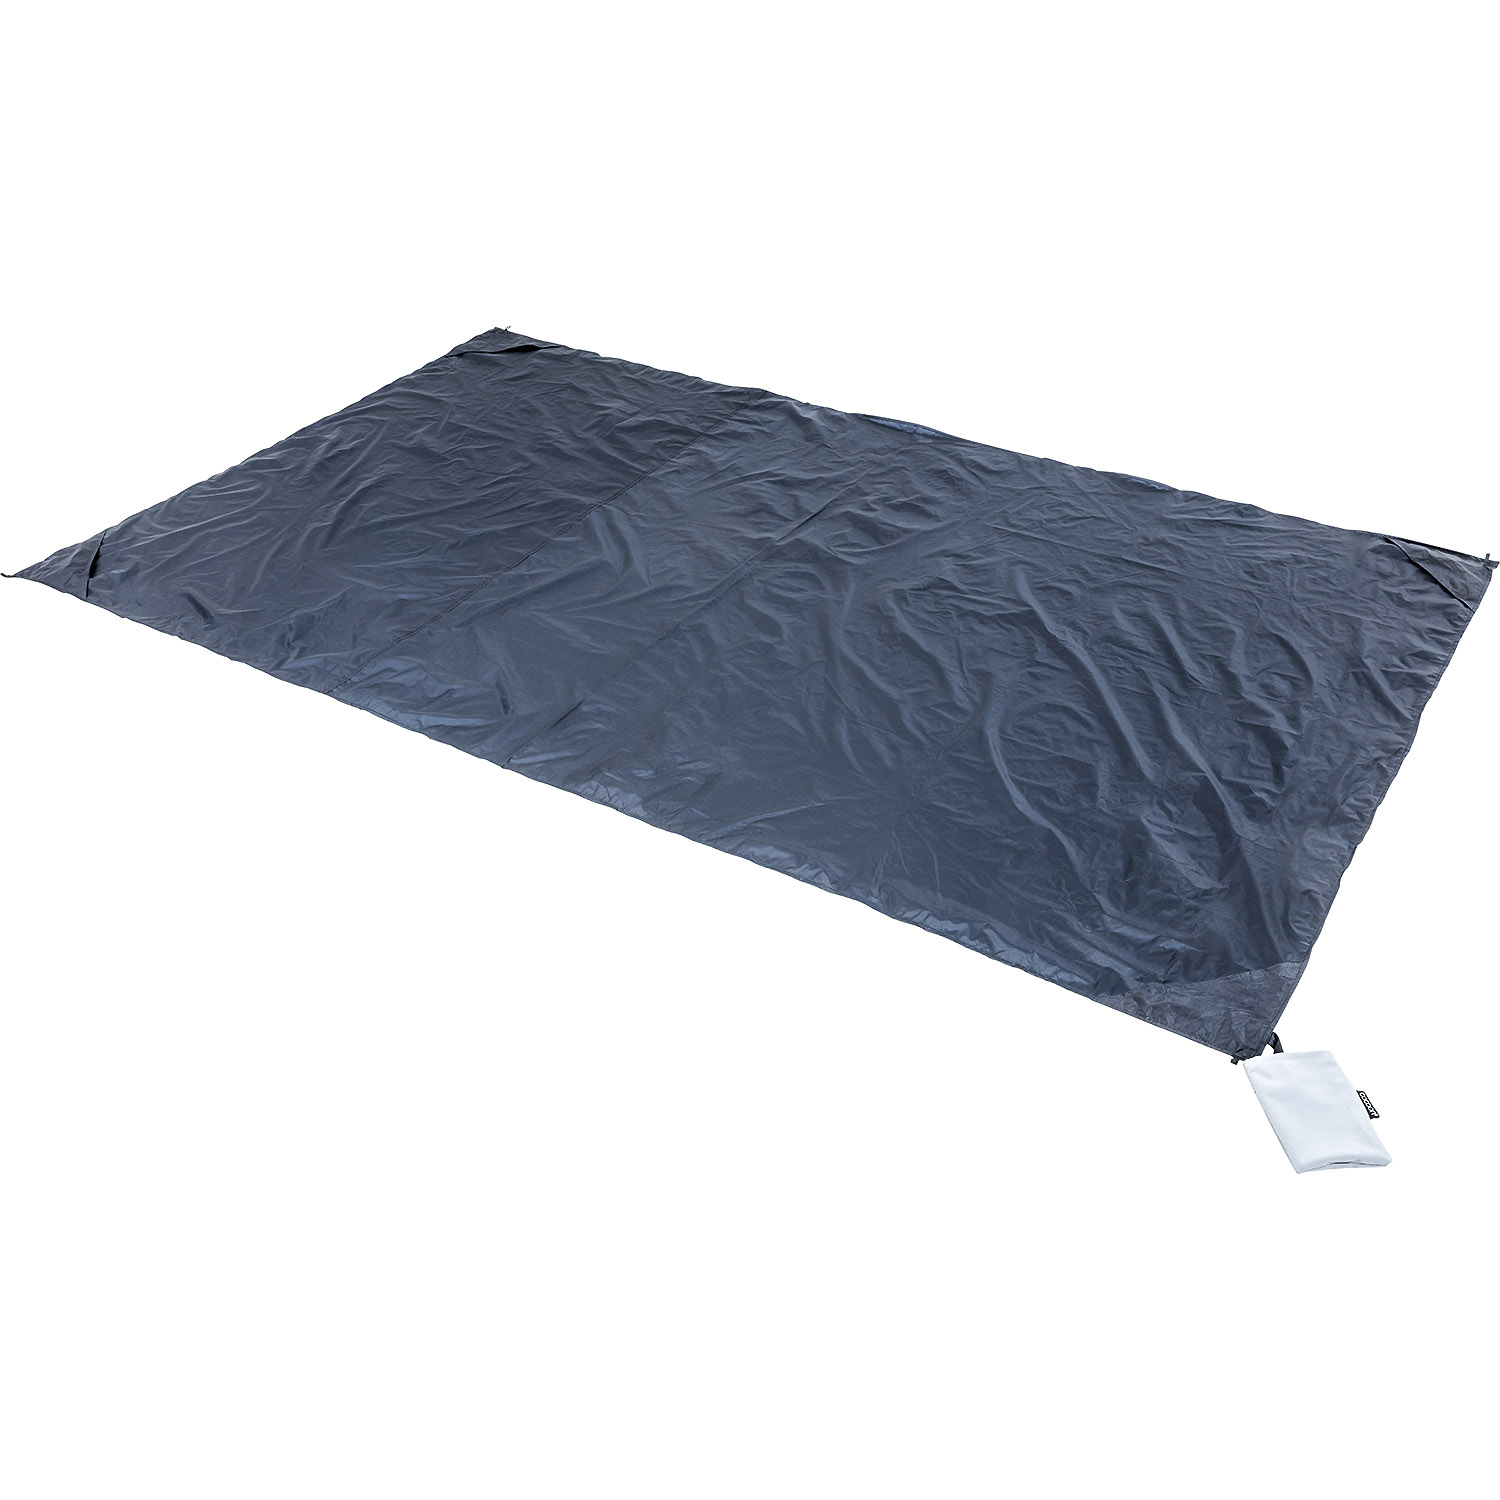 Picnic/Outdoor/Festival Blanket mit 8000 mm PU-Coating